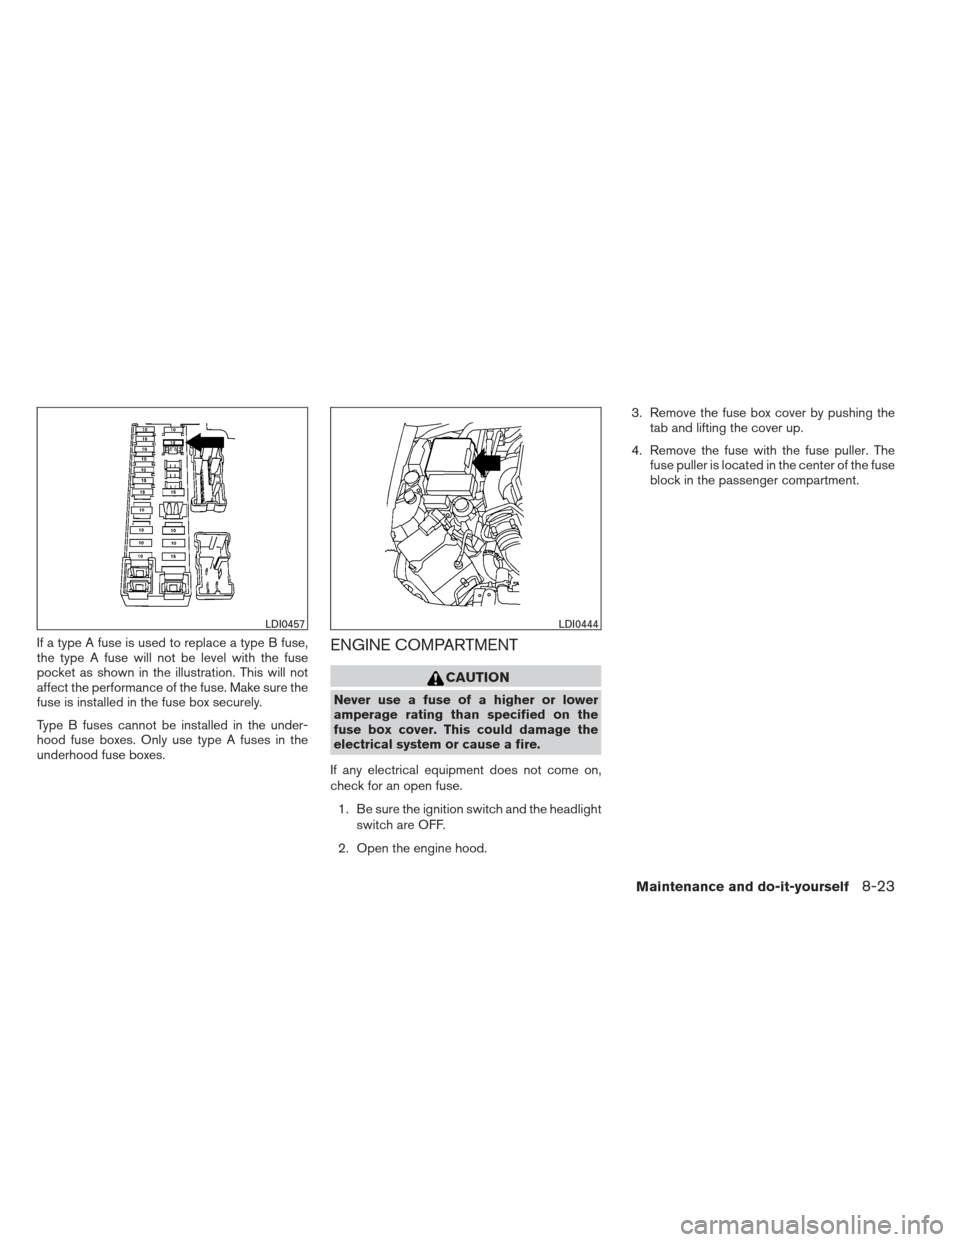 NISSAN XTERRA 2012 N50 / 2.G Owners Manual If a type A fuse is used to replace a type B fuse,
the type A fuse will not be level with the fuse
pocket as shown in the illustration. This will not
affect the performance of the fuse. Make sure the
